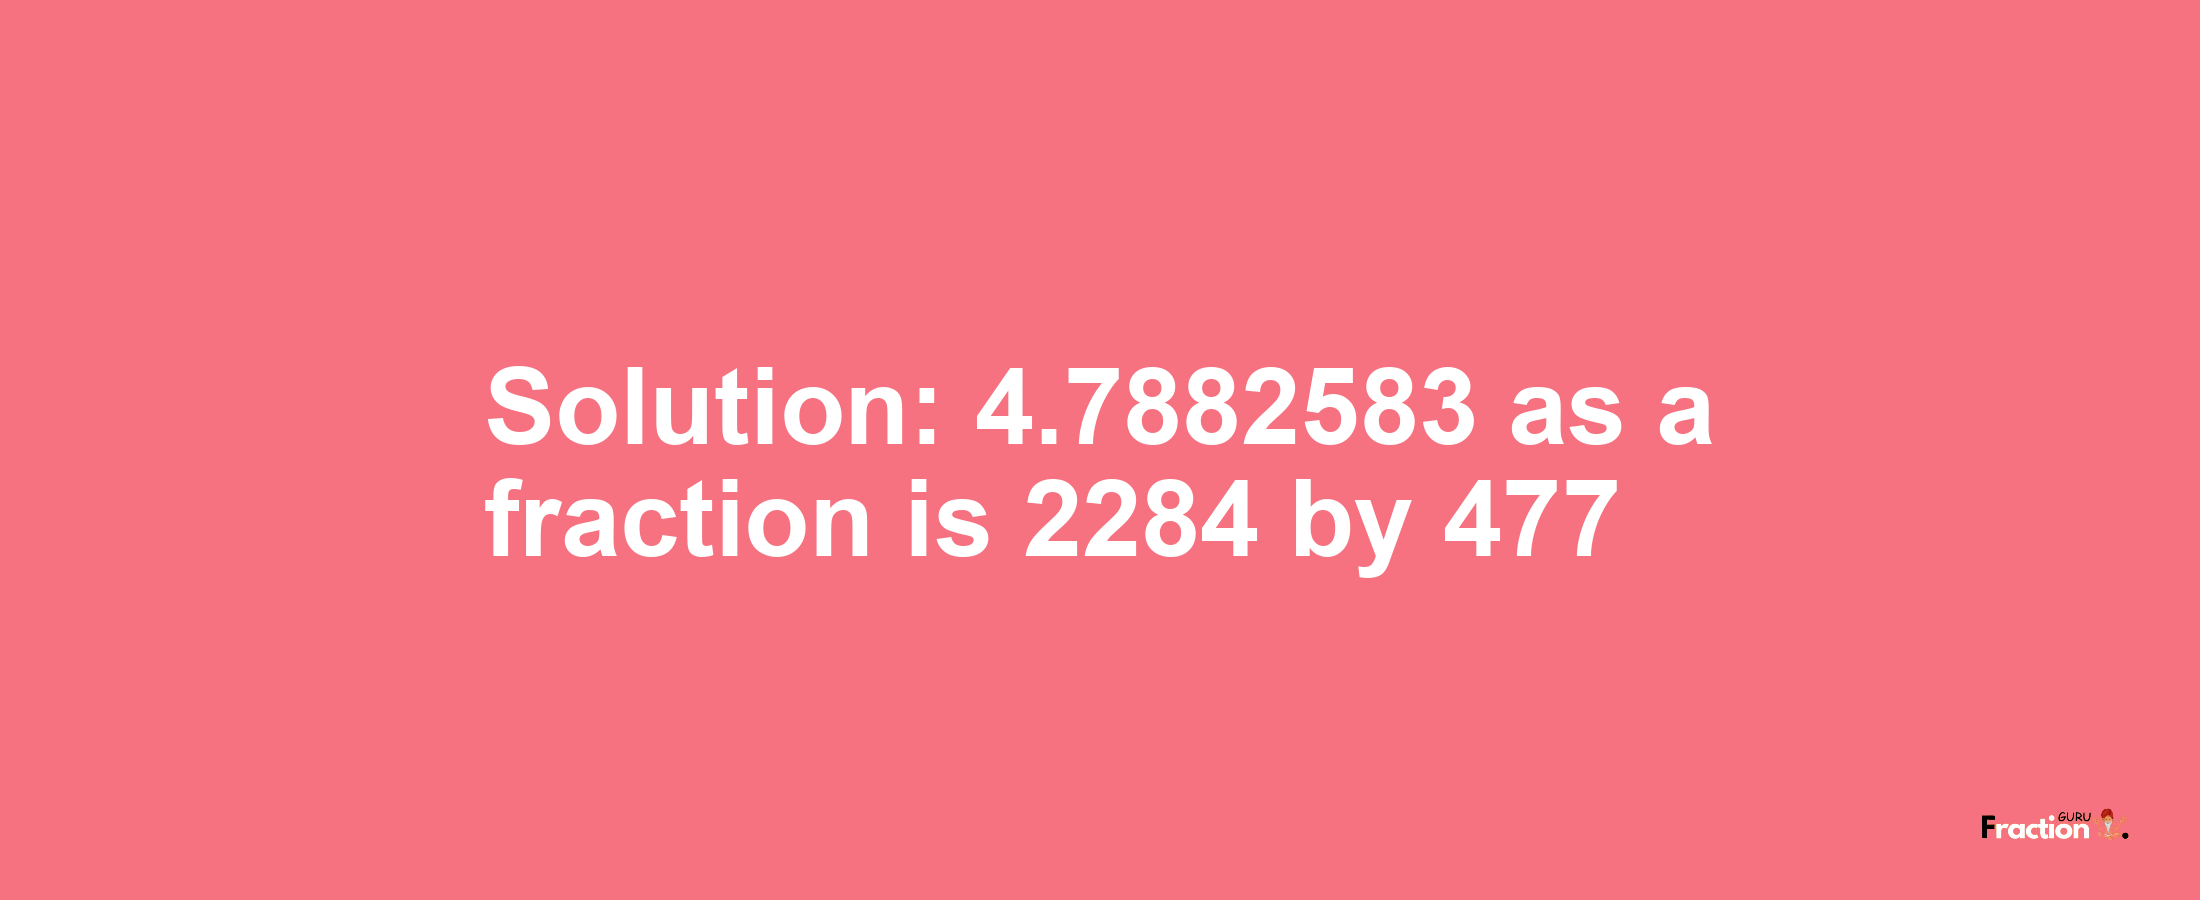 Solution:4.7882583 as a fraction is 2284/477